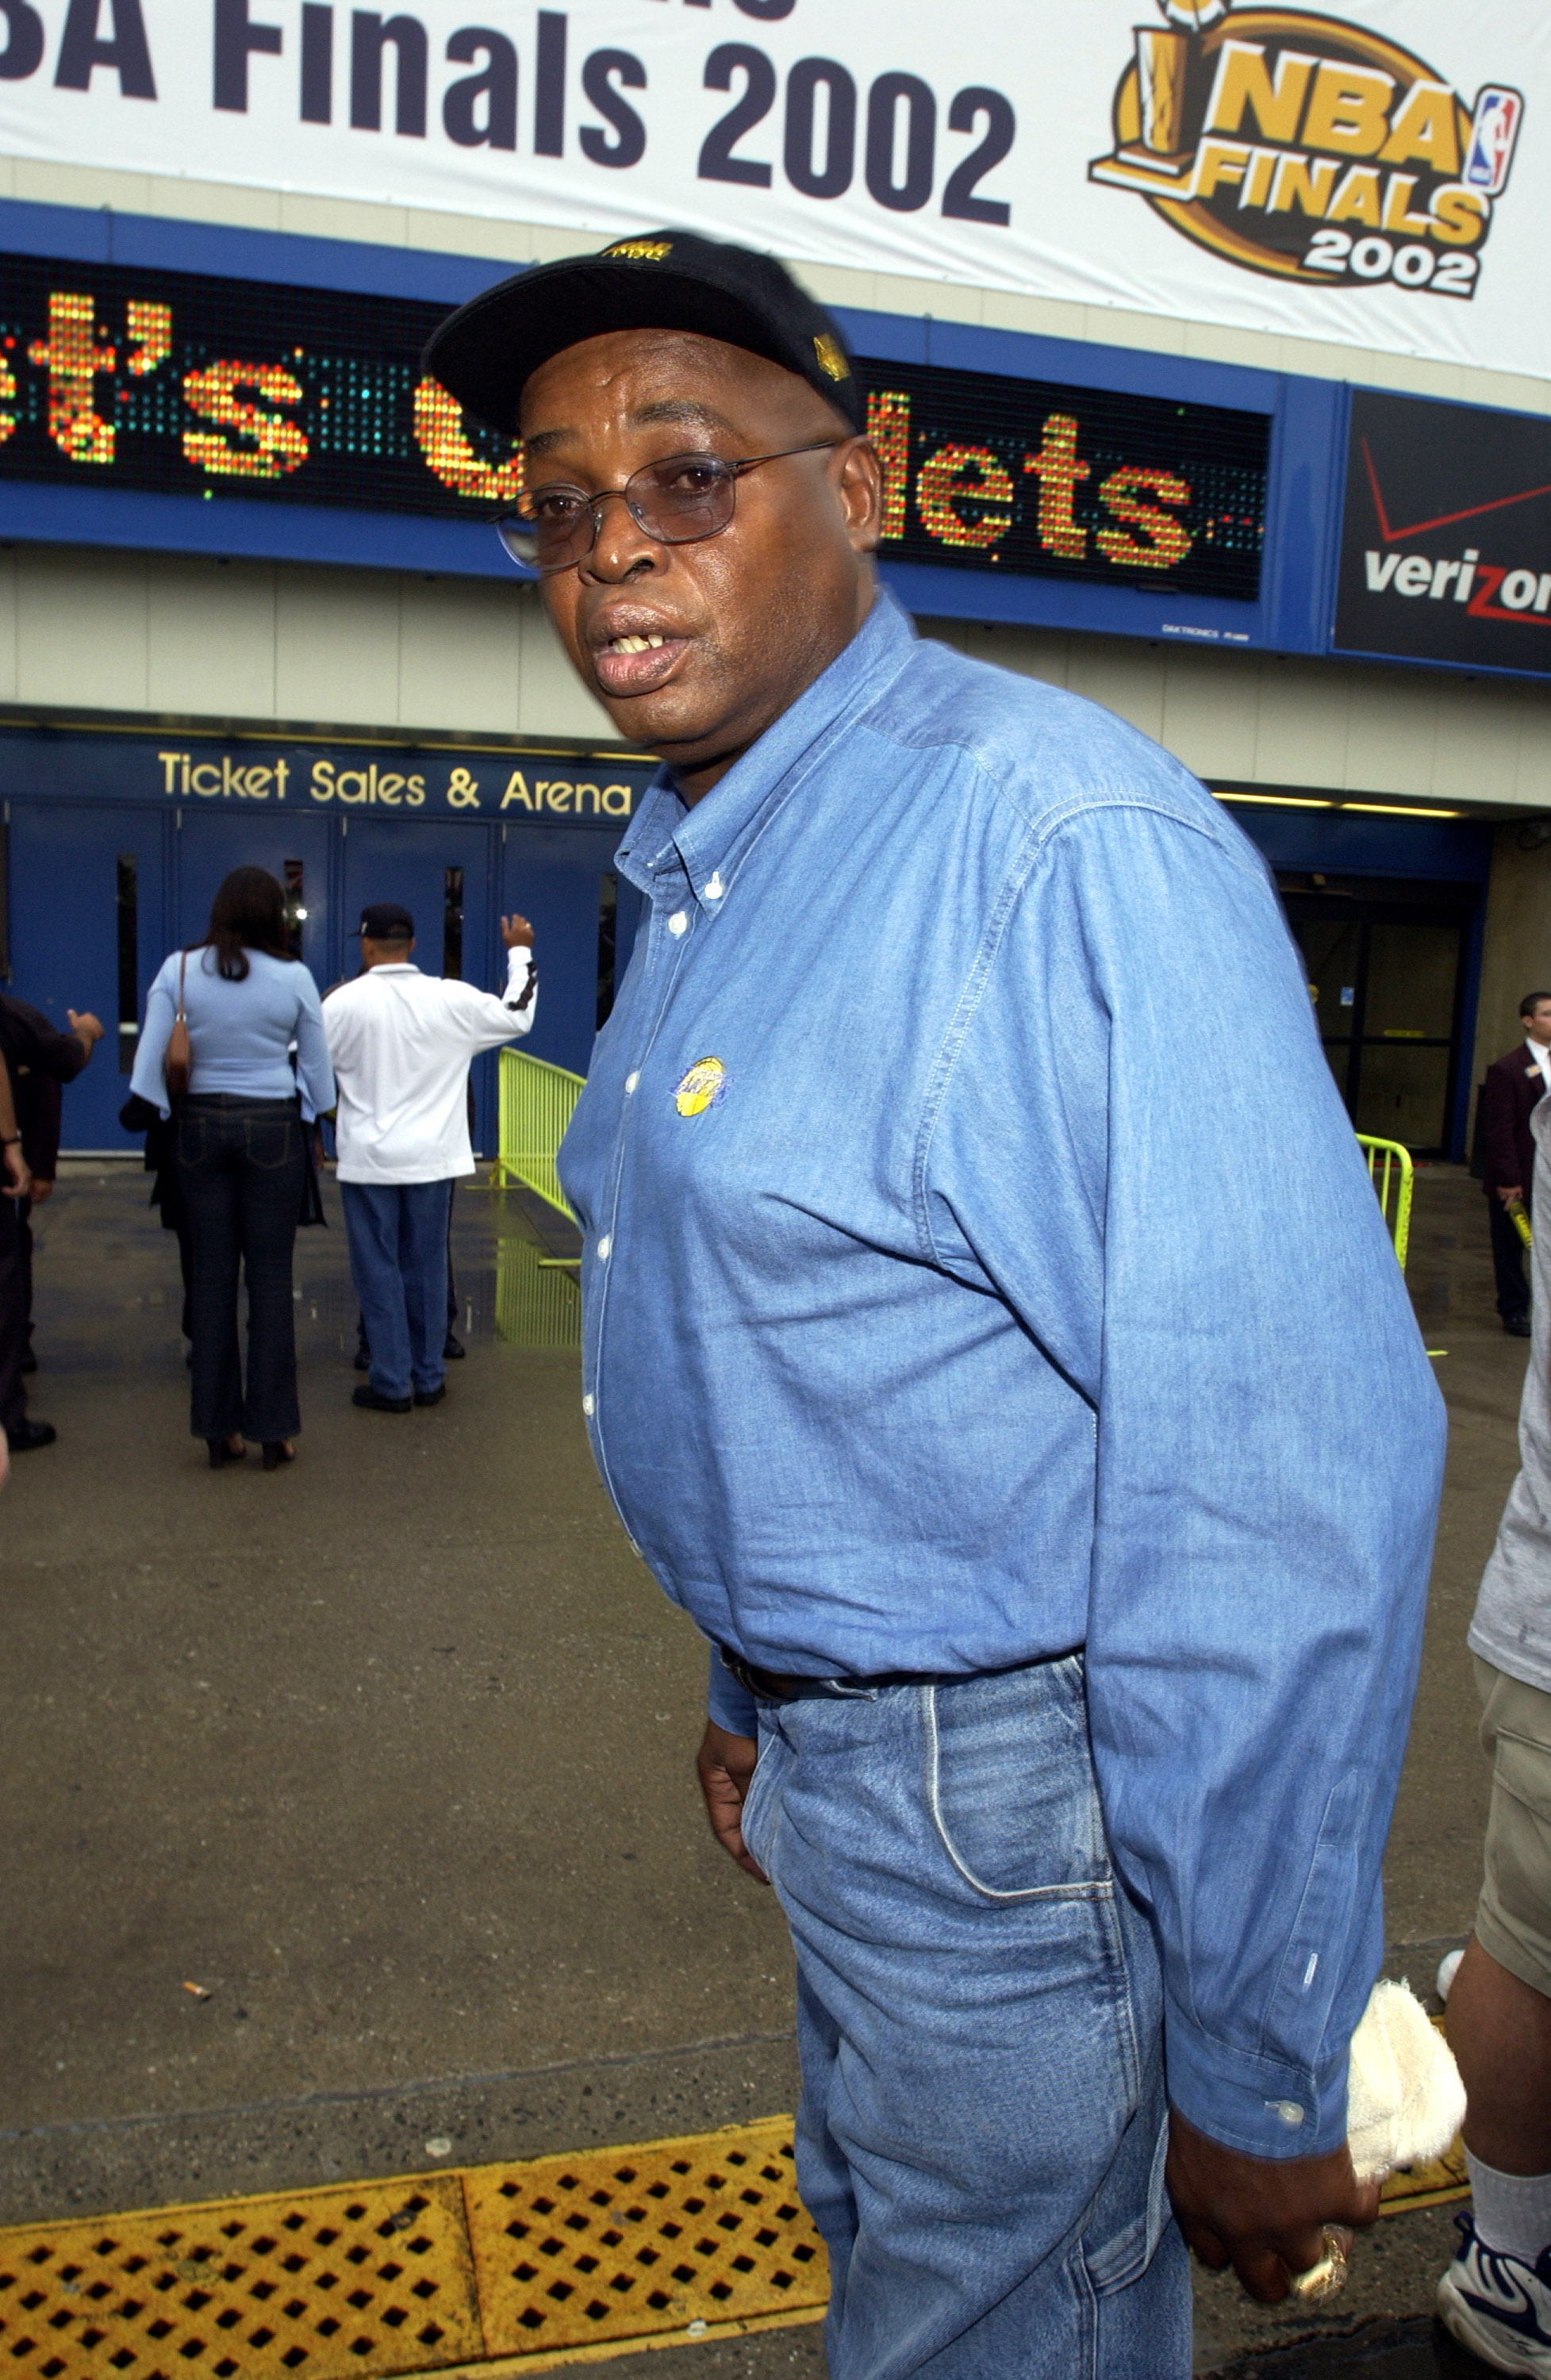 Philip Arthur Harrison attends Game 4 of the NBA Finals with the Los Angeles Lakers and the New Jersey Nets in 2002. | Source: Getty Images